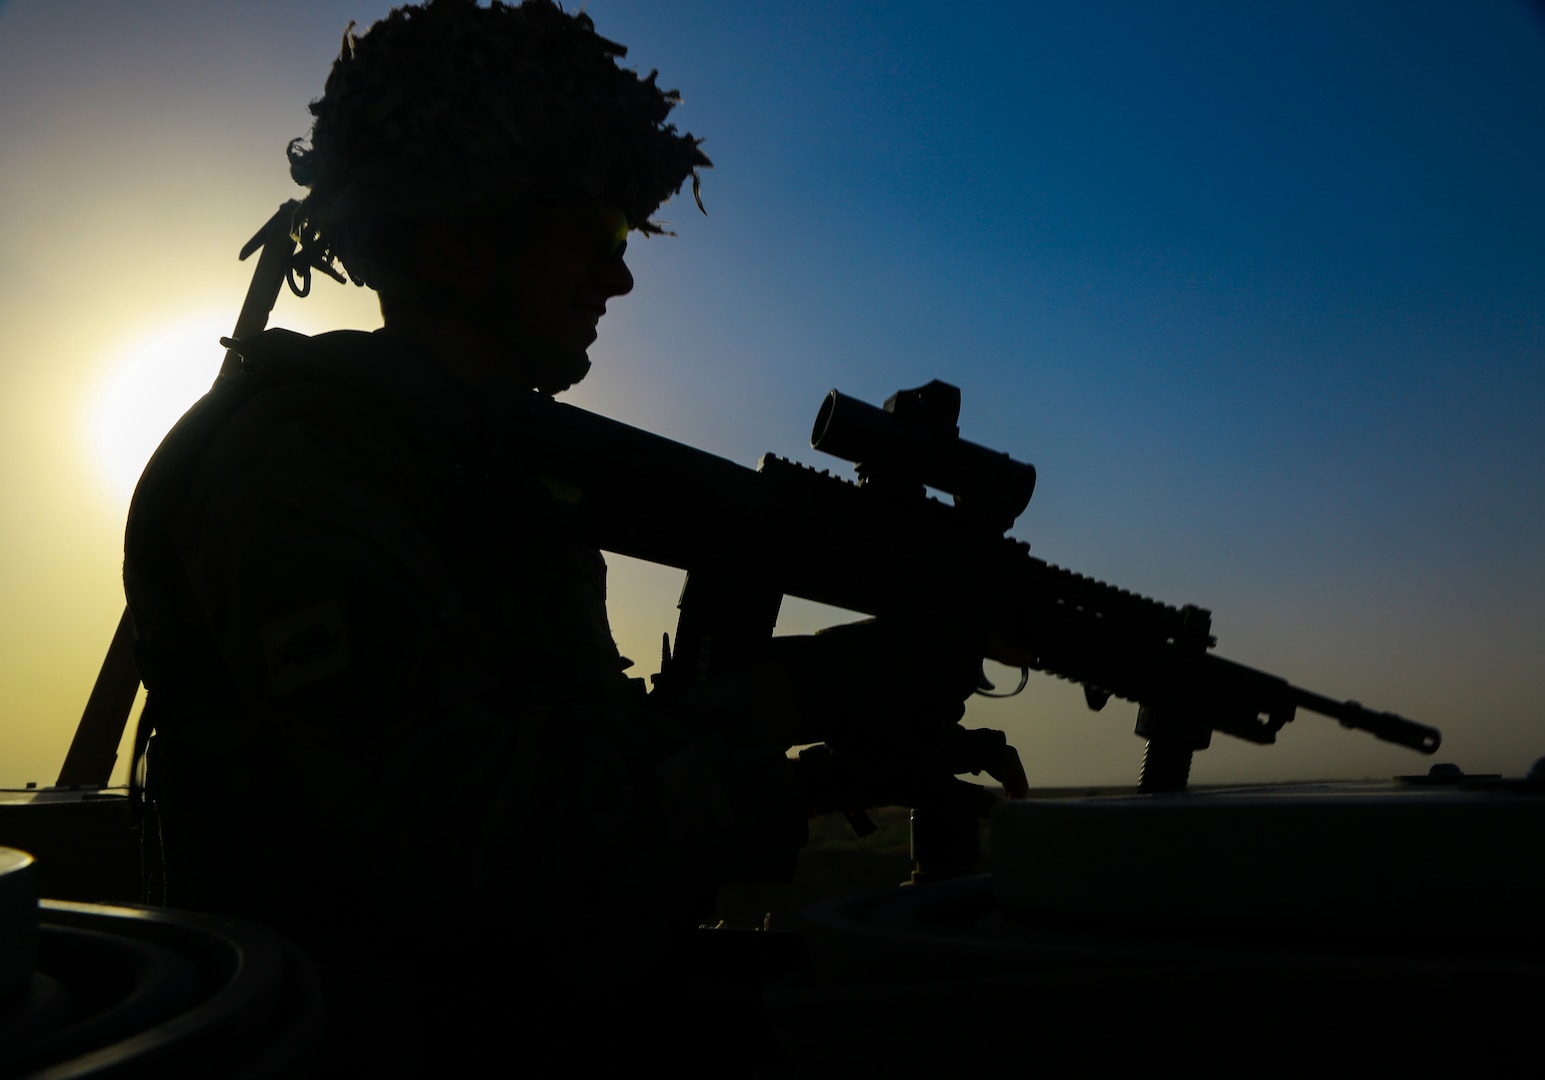 A British soldier, deployed in support of Combined Joint Task Force Operation Inherent Resolve, overlooks the Besmaya Range Complex while Iraqi security forces conduct breach training in Iraq on June 03, 2017. The breadth and diversity of partners supporting the coalition demonstrate the global and unified nature of the endeavor to defeat ISIS in Iraq and Syria. CJTF-OIR is the global coalition to defeat ISIS in Iraq and Syria. Army photo by Spc. William Gibson